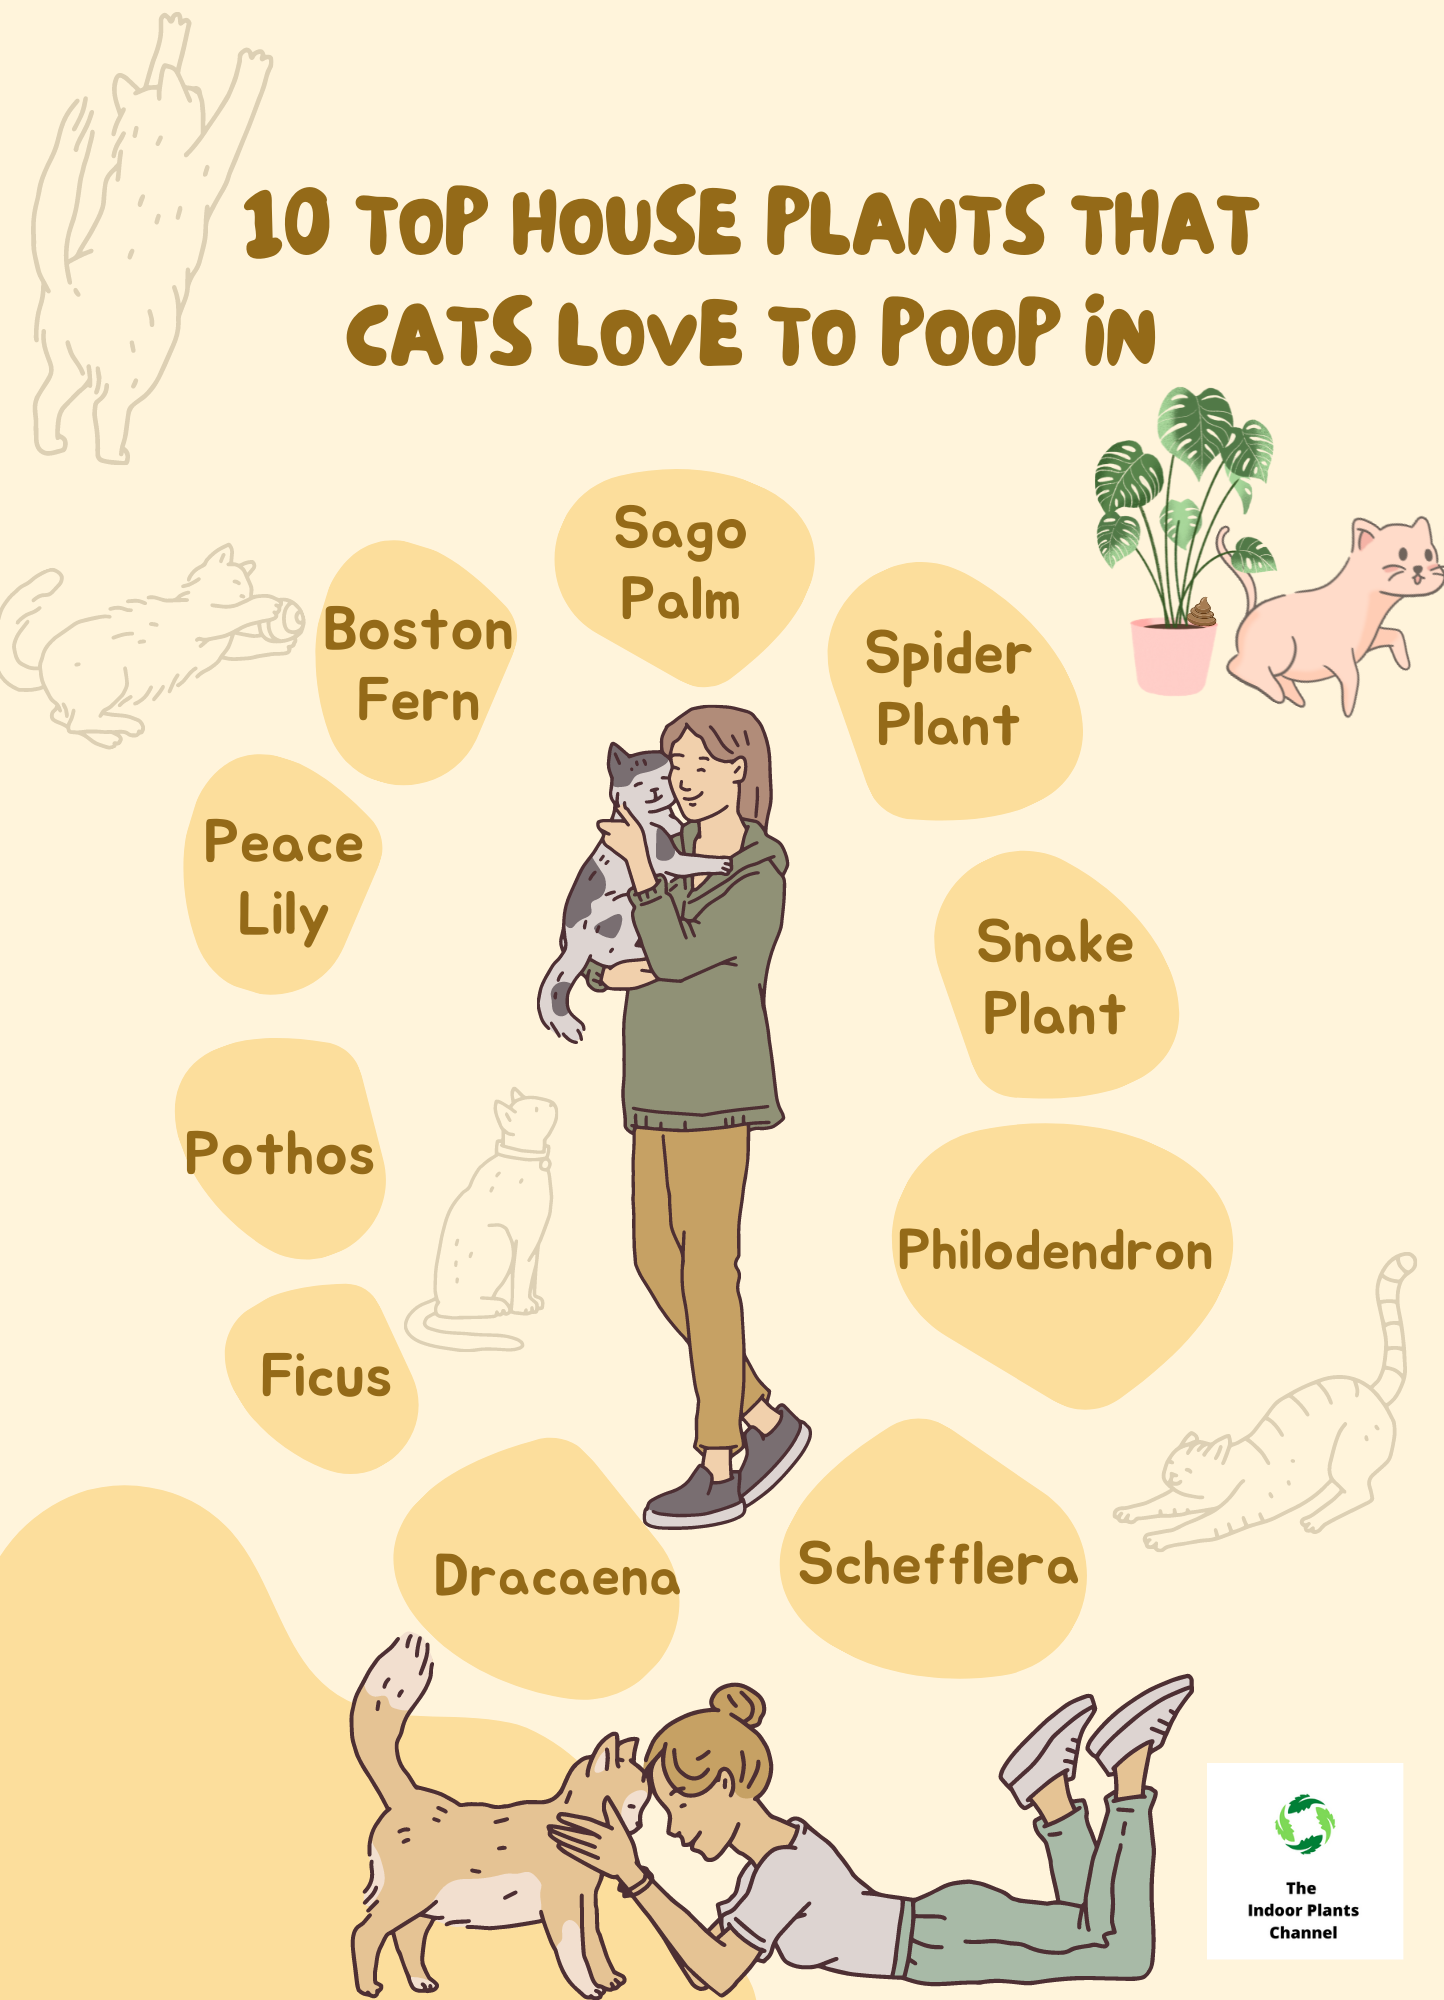 The Top 10 House Plants That Cats Love To Poop In